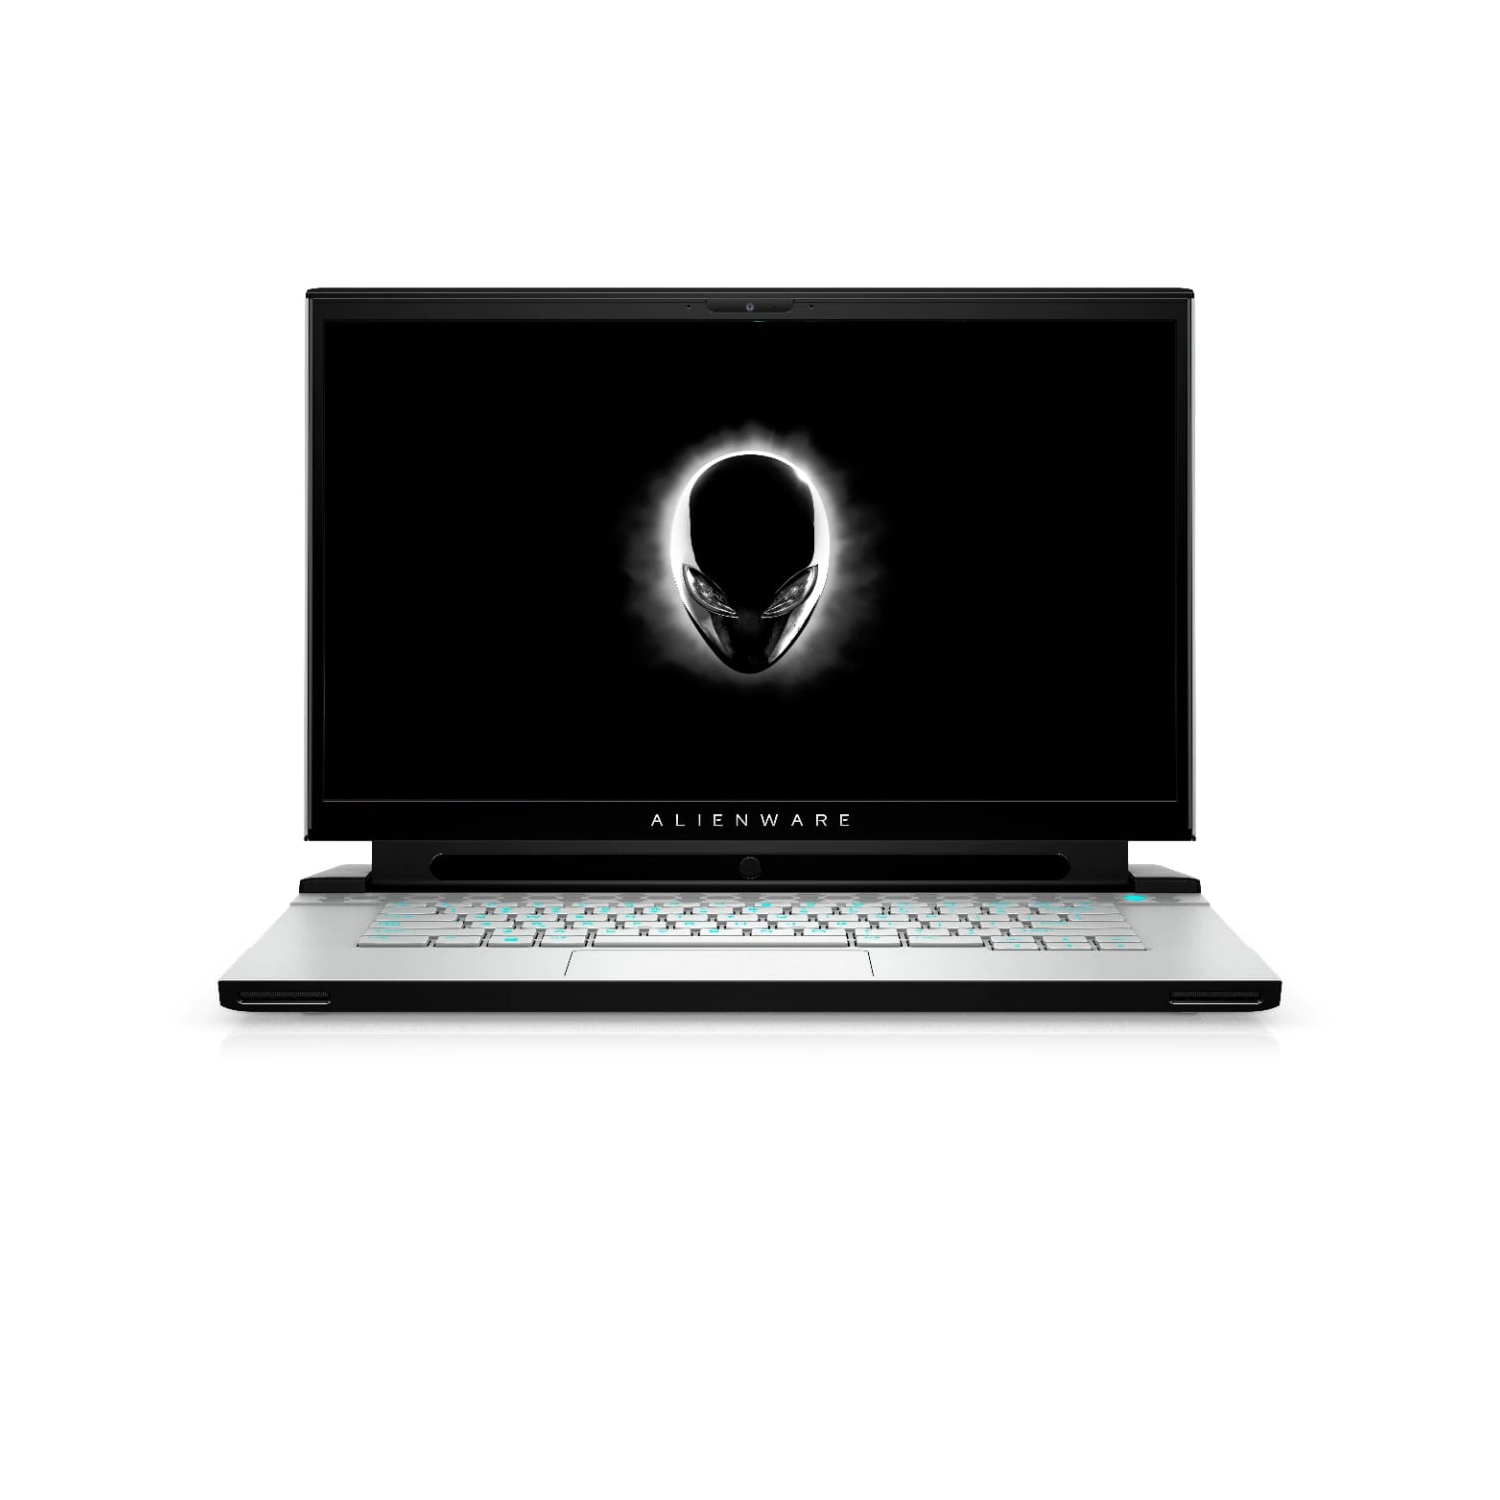 Refurbished (Excellent) - Dell Alienware m15 R3 Gaming Laptop (2020), 15.6" FHD, Core i7, 512GB SSD + 512GB SSD, 16GB RAM, RTX 2070, 5 GHz, 10th Gen CPU Certified